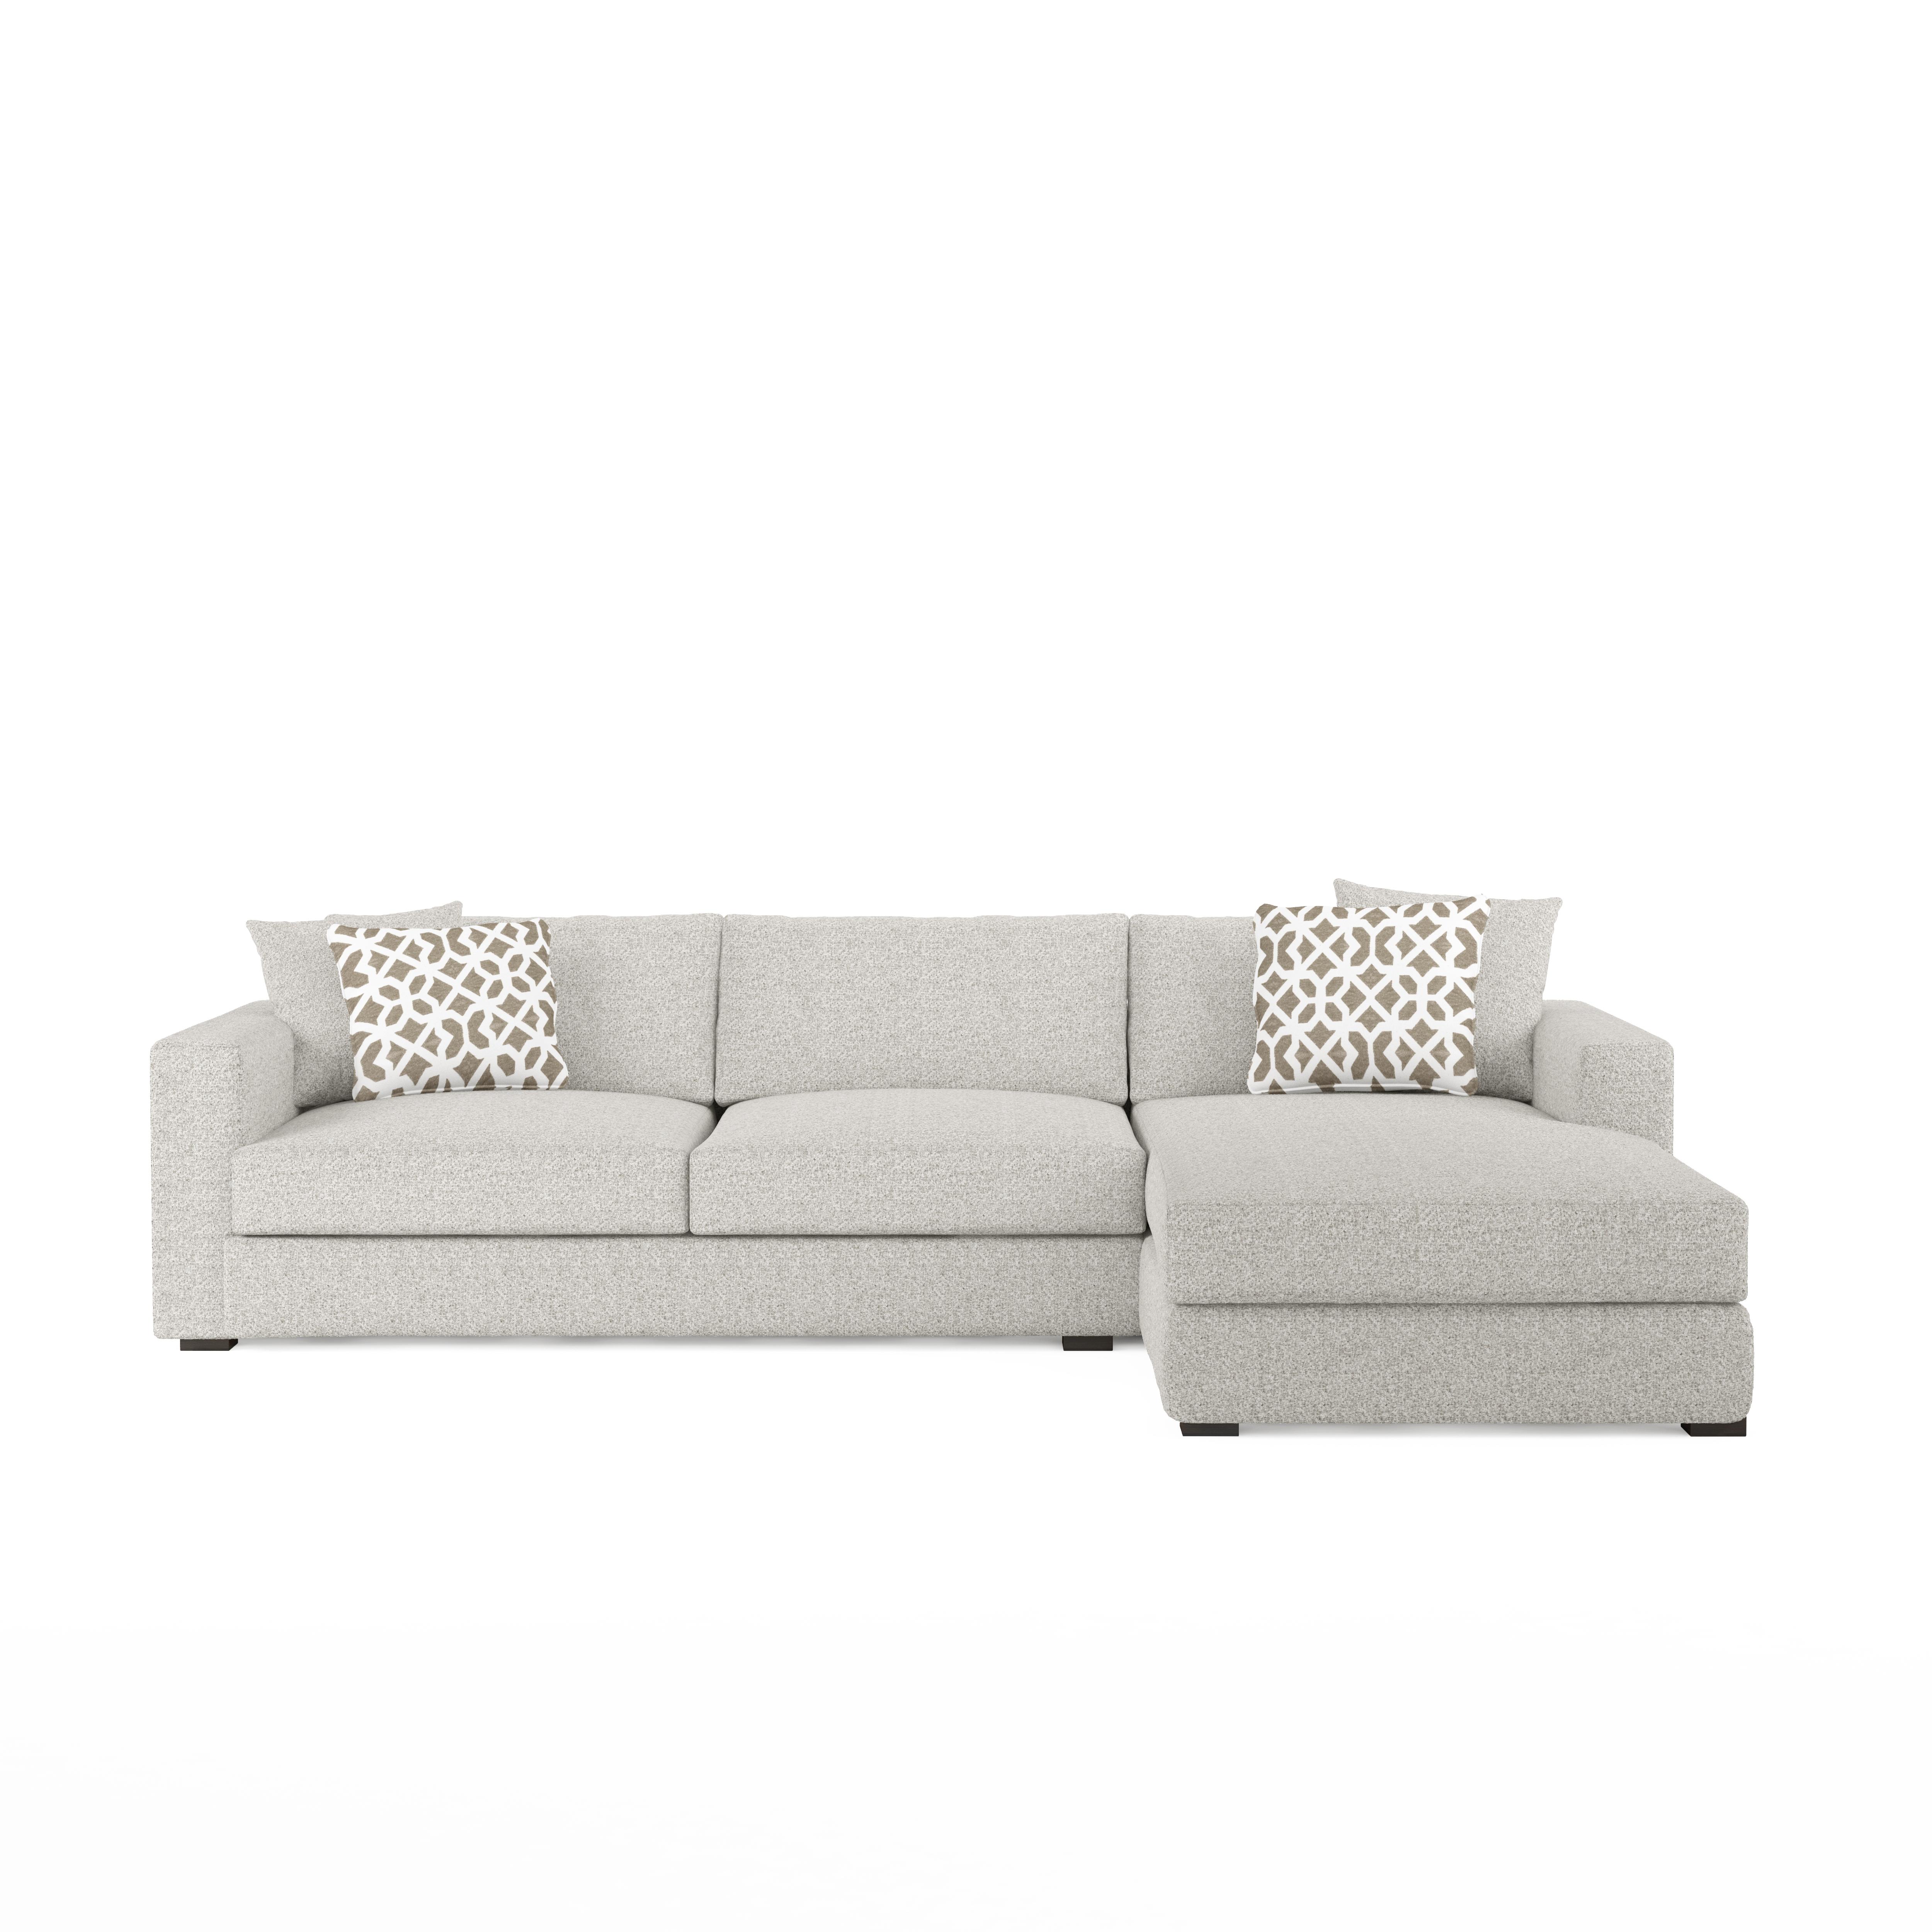 Modern, Traditional Sectional Sofa Scully Ryden 780585-5012C8S2 in Gray Fabric